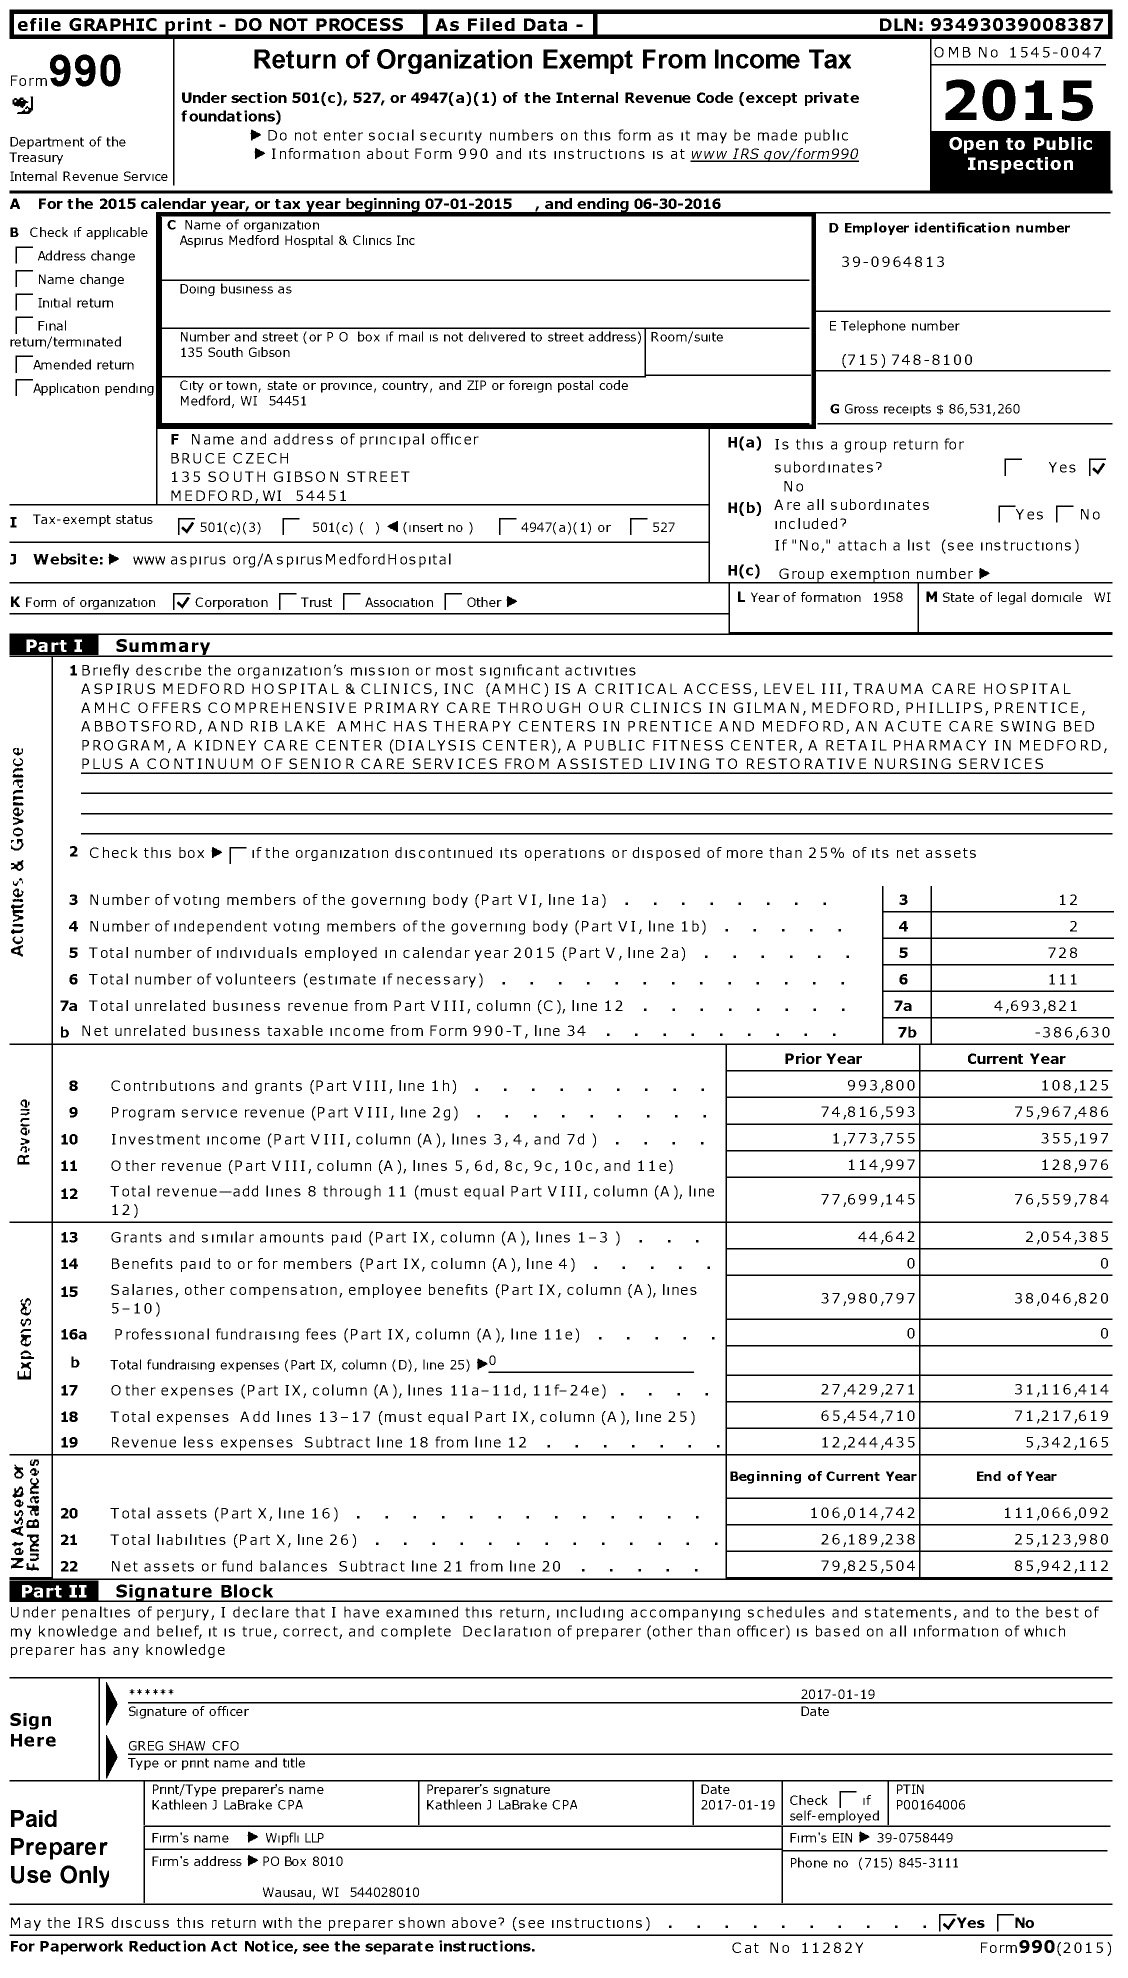 Image of first page of 2015 Form 990 for Aspirus Medford Hospital & Clinics (AMHC)